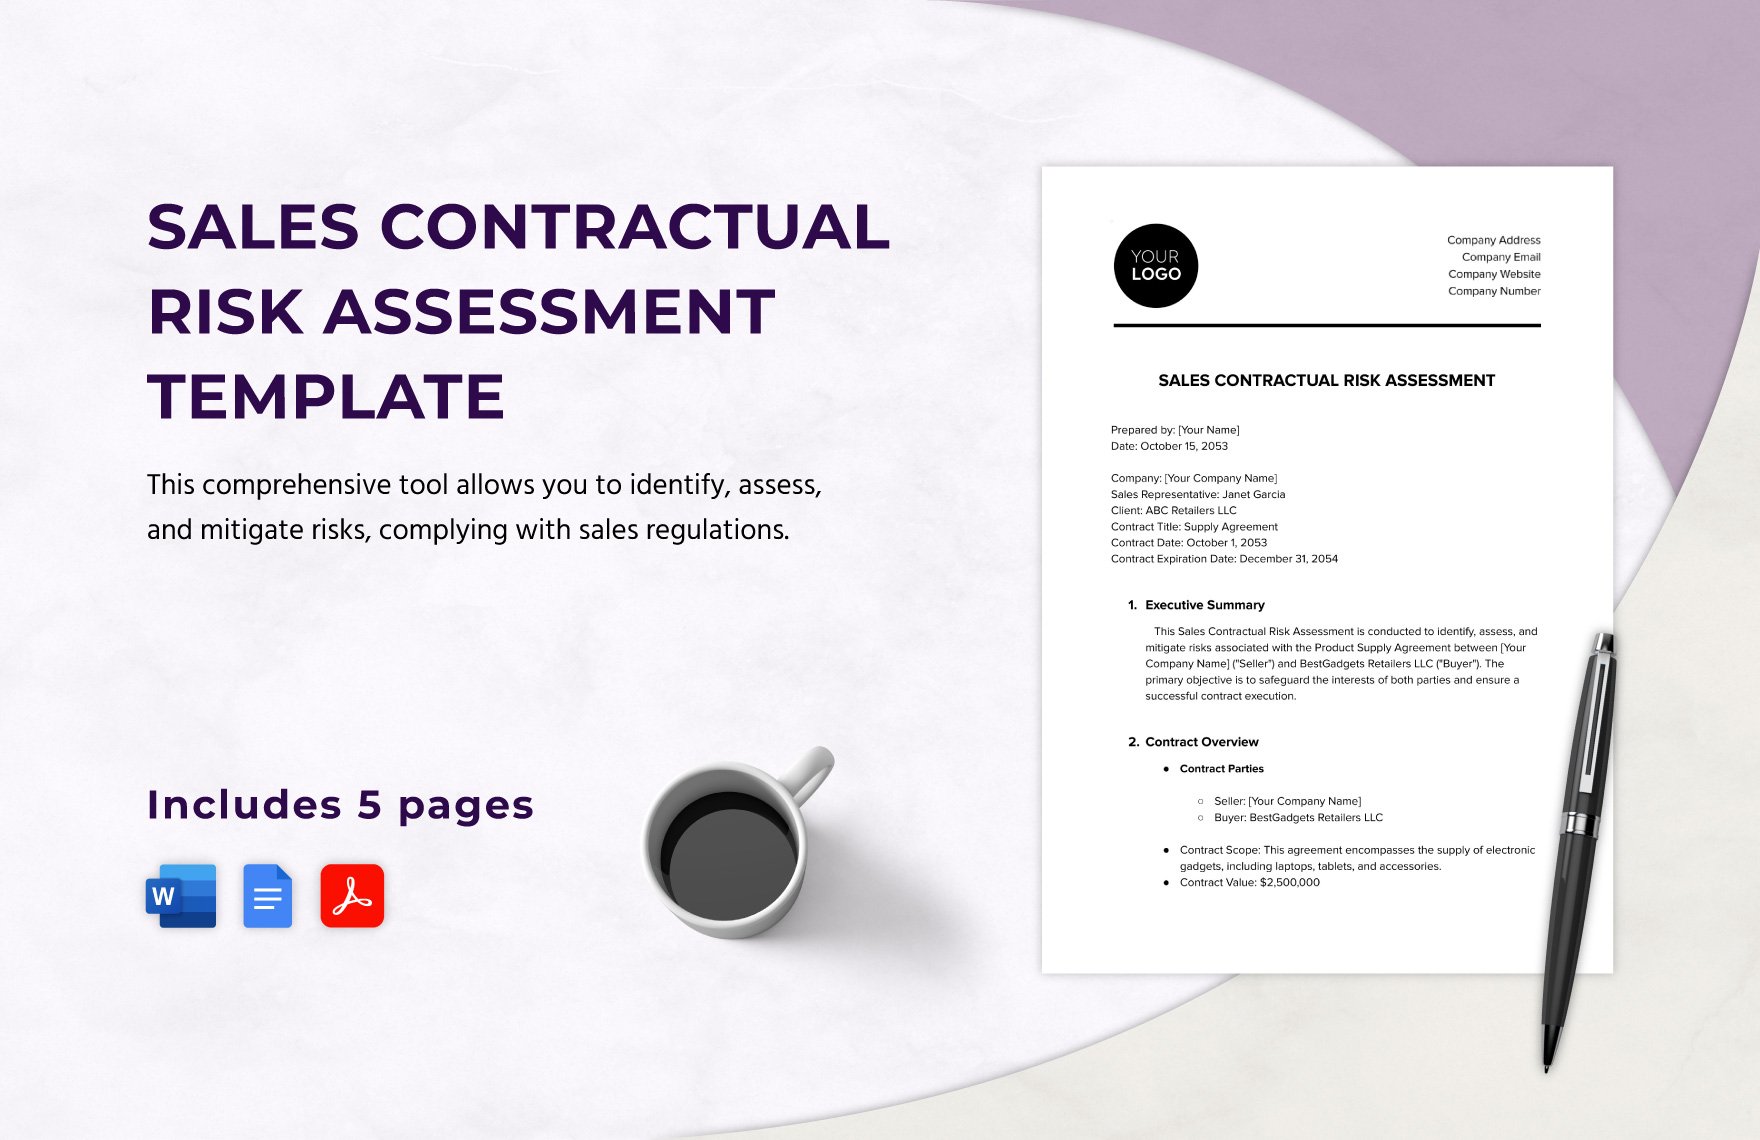 Sales Contractual Risk Assessment Template